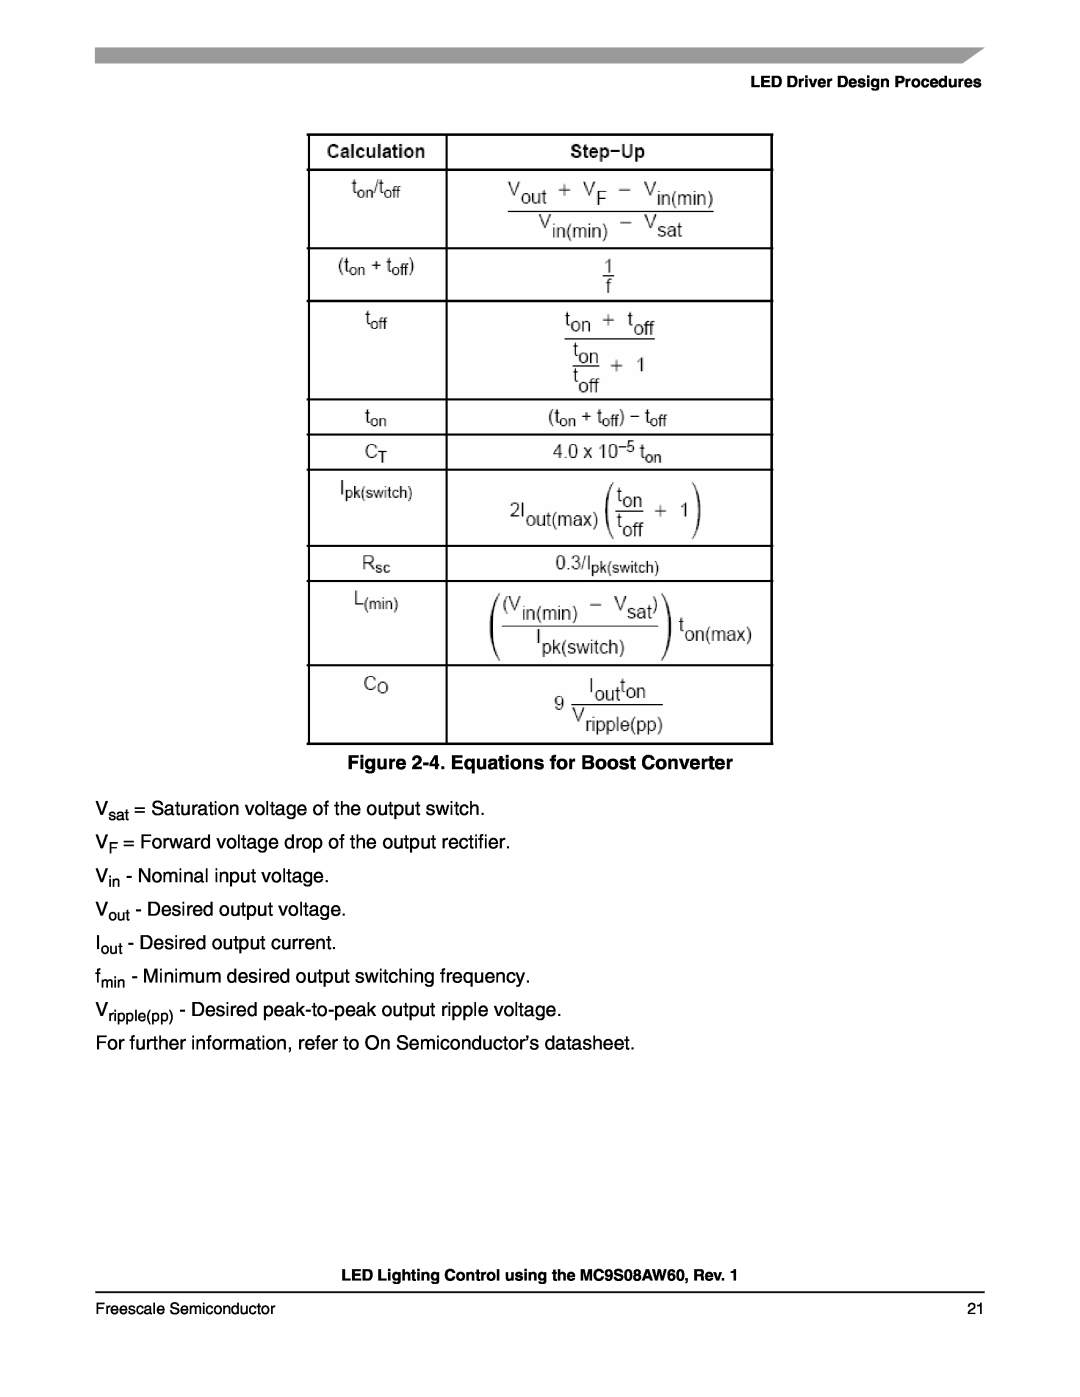 Freescale Semiconductor S08 manual 4. Equations for Boost Converter 